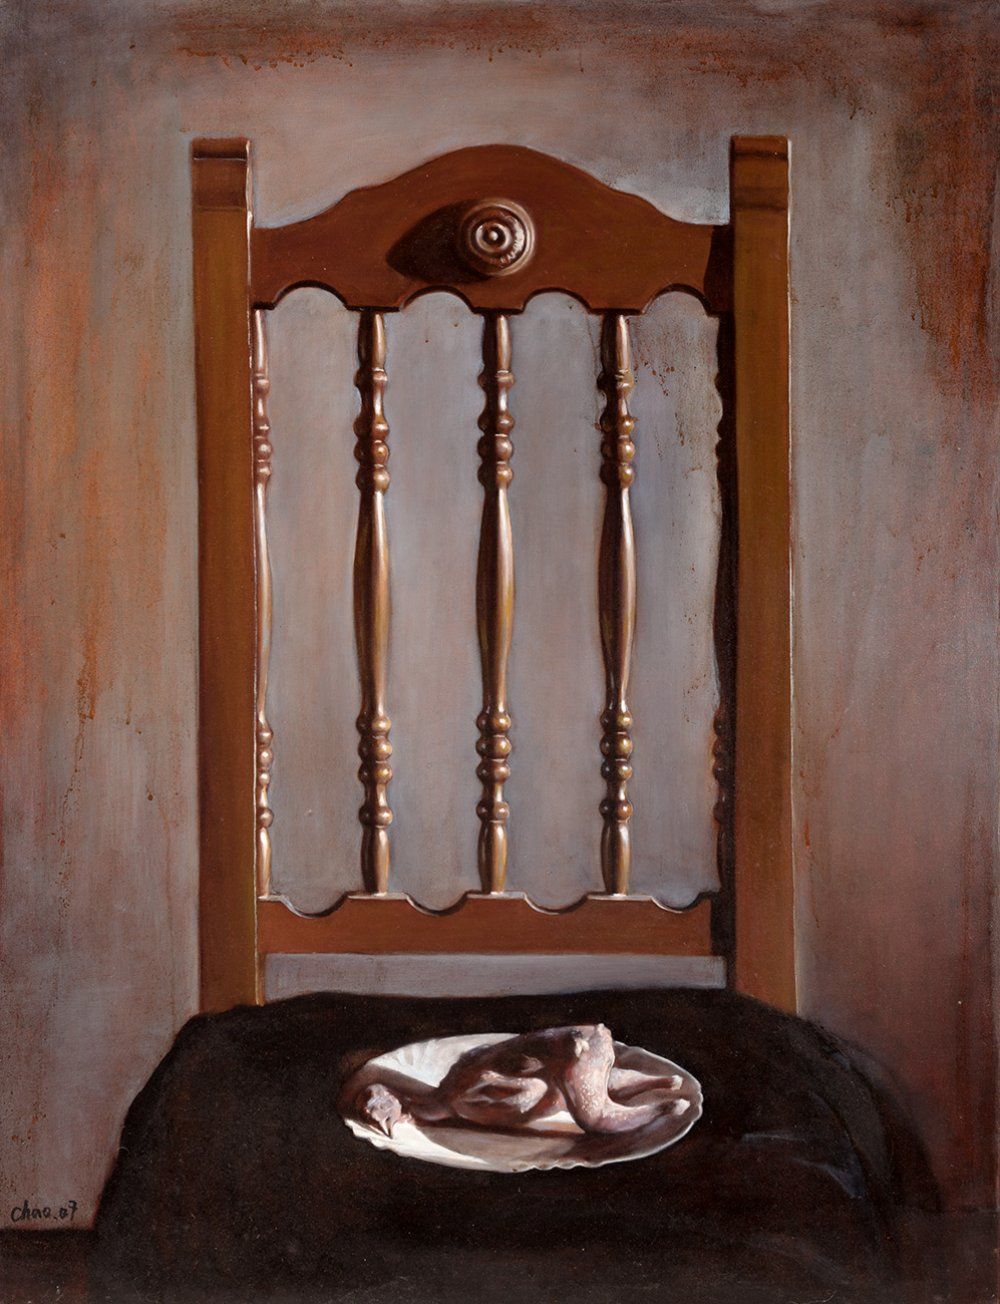 Null CHAO CHENG HUANG (Taiwan, 1977)
"The Chair", 2007.
Oil on canvas.
Signed an&hellip;